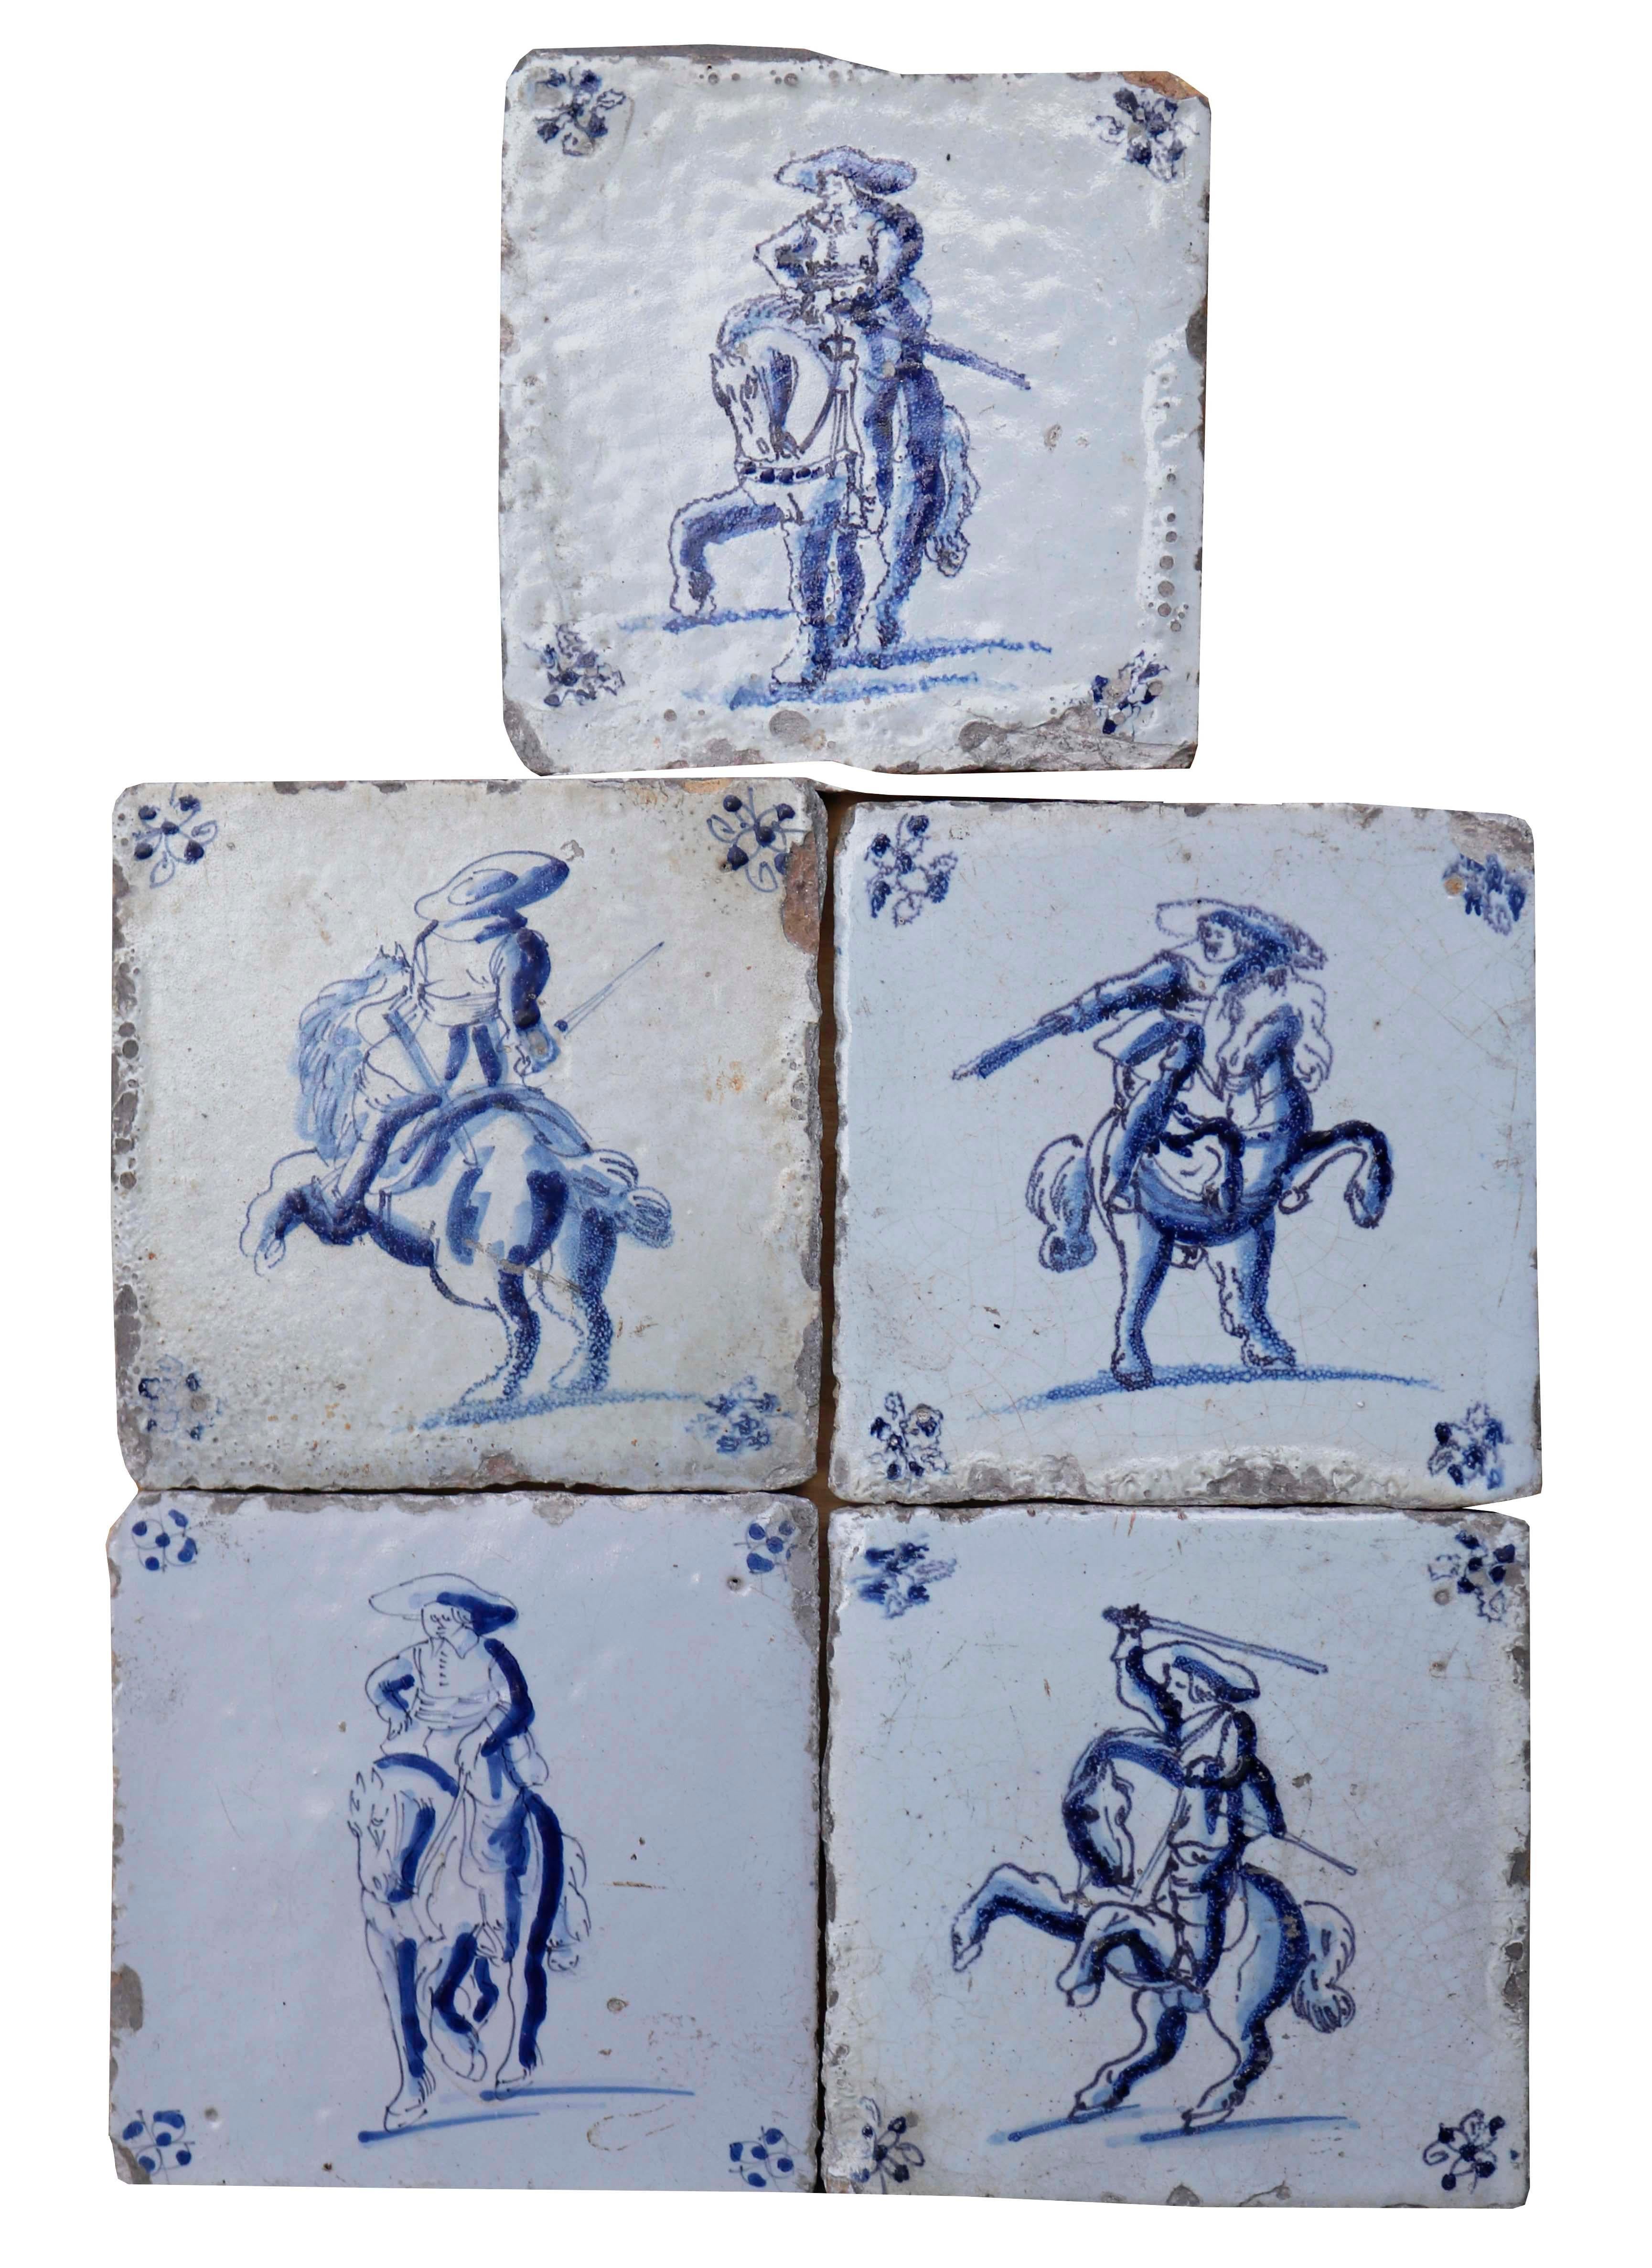 Five Delft tiles Featuring Horsemen. These characterful Delftware tiles depict soldiers on horseback in expressive blue colouring on a white background. Each image provides a wonderful unique illustration.

Additional dimensions

Each tile 12.5